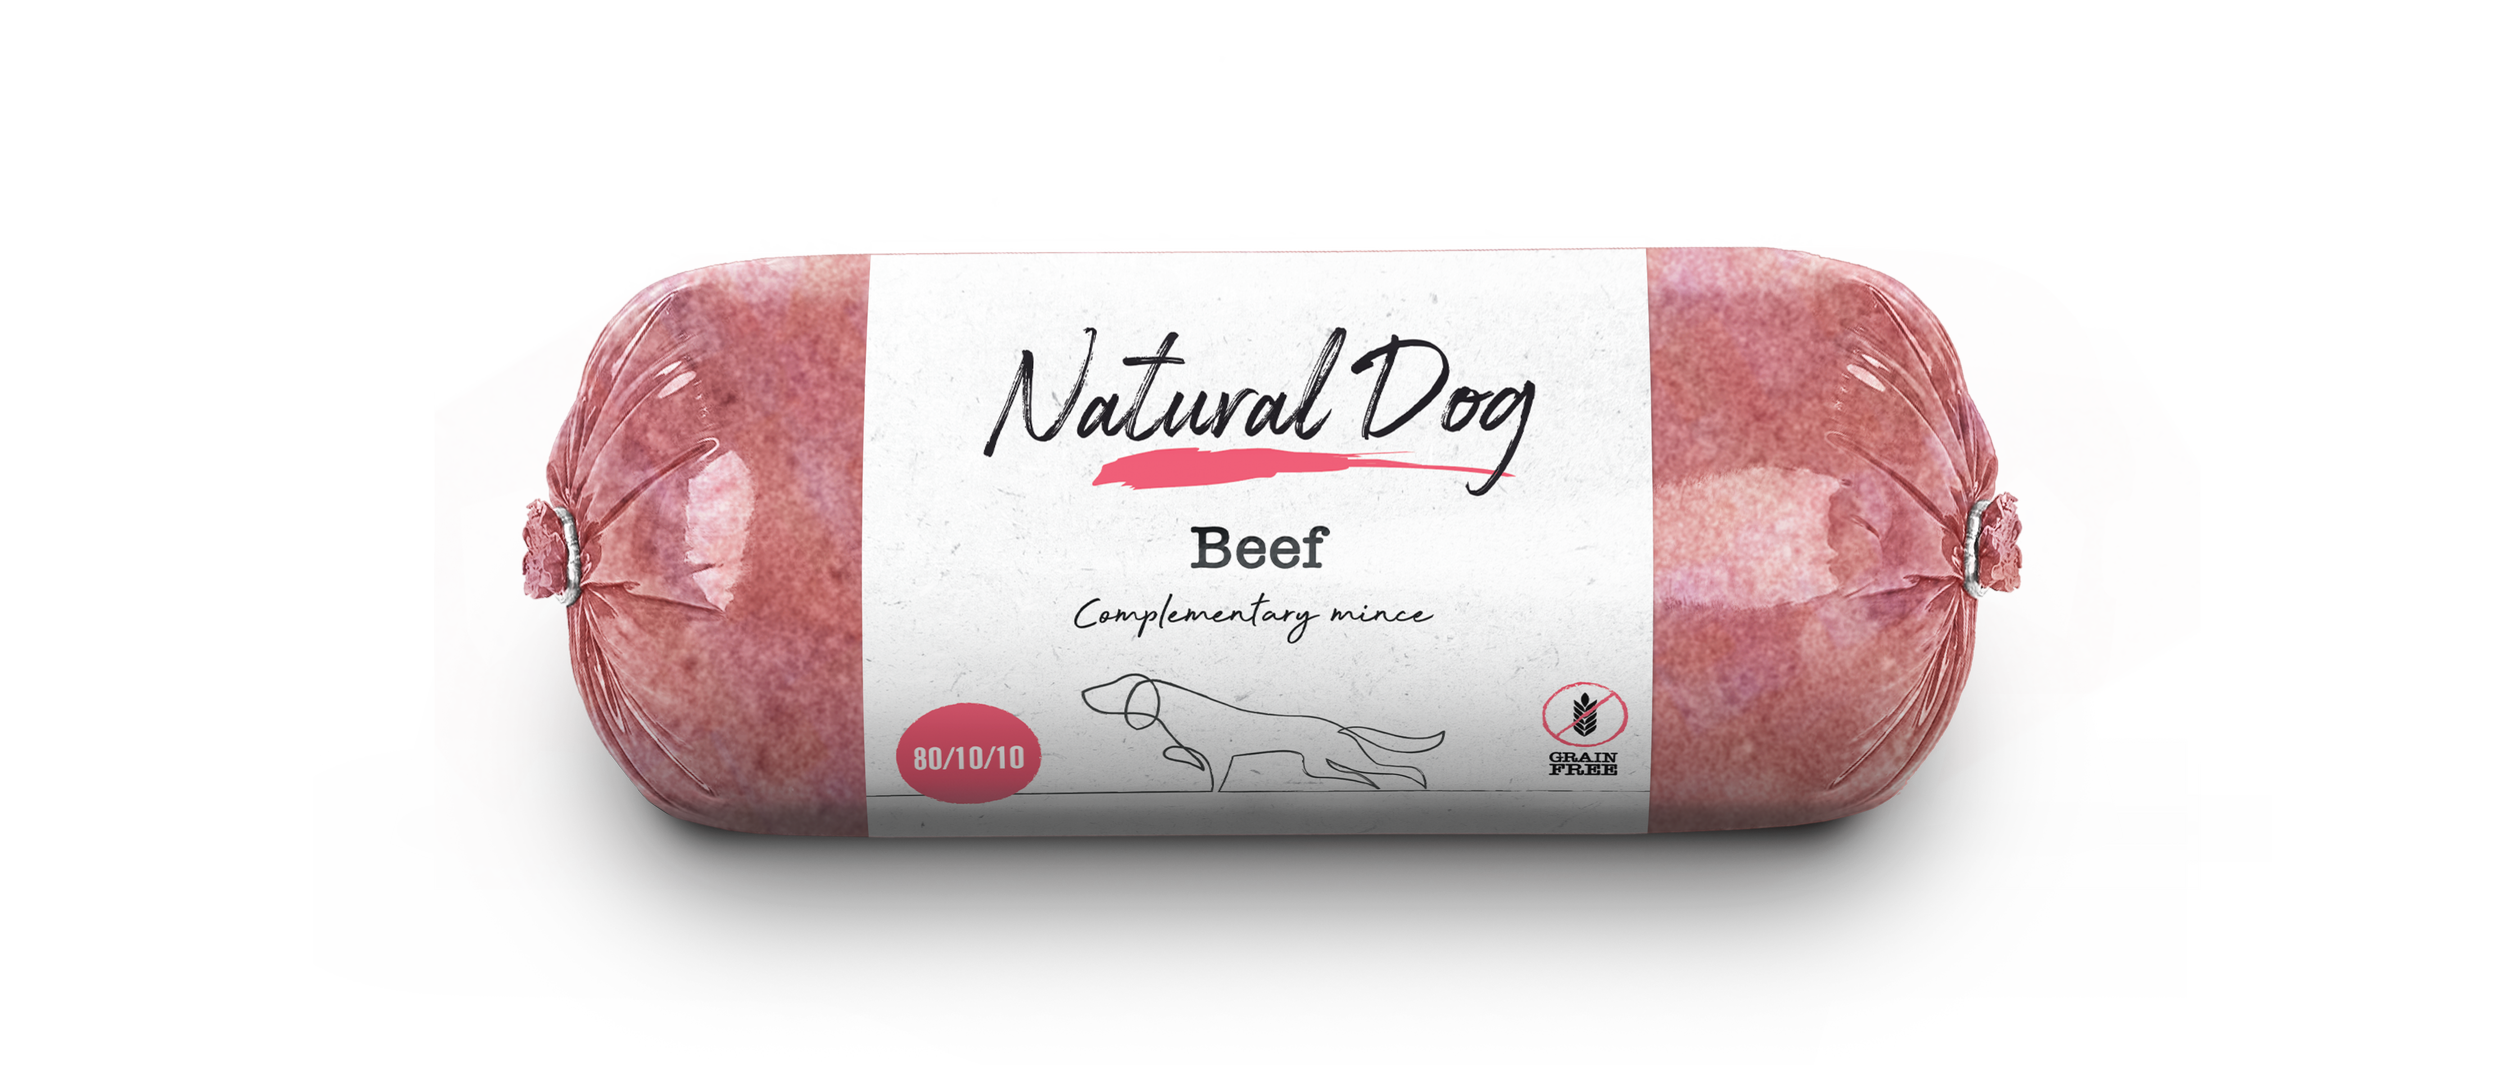 Natural Dog_Top down chub roll_Beef.png